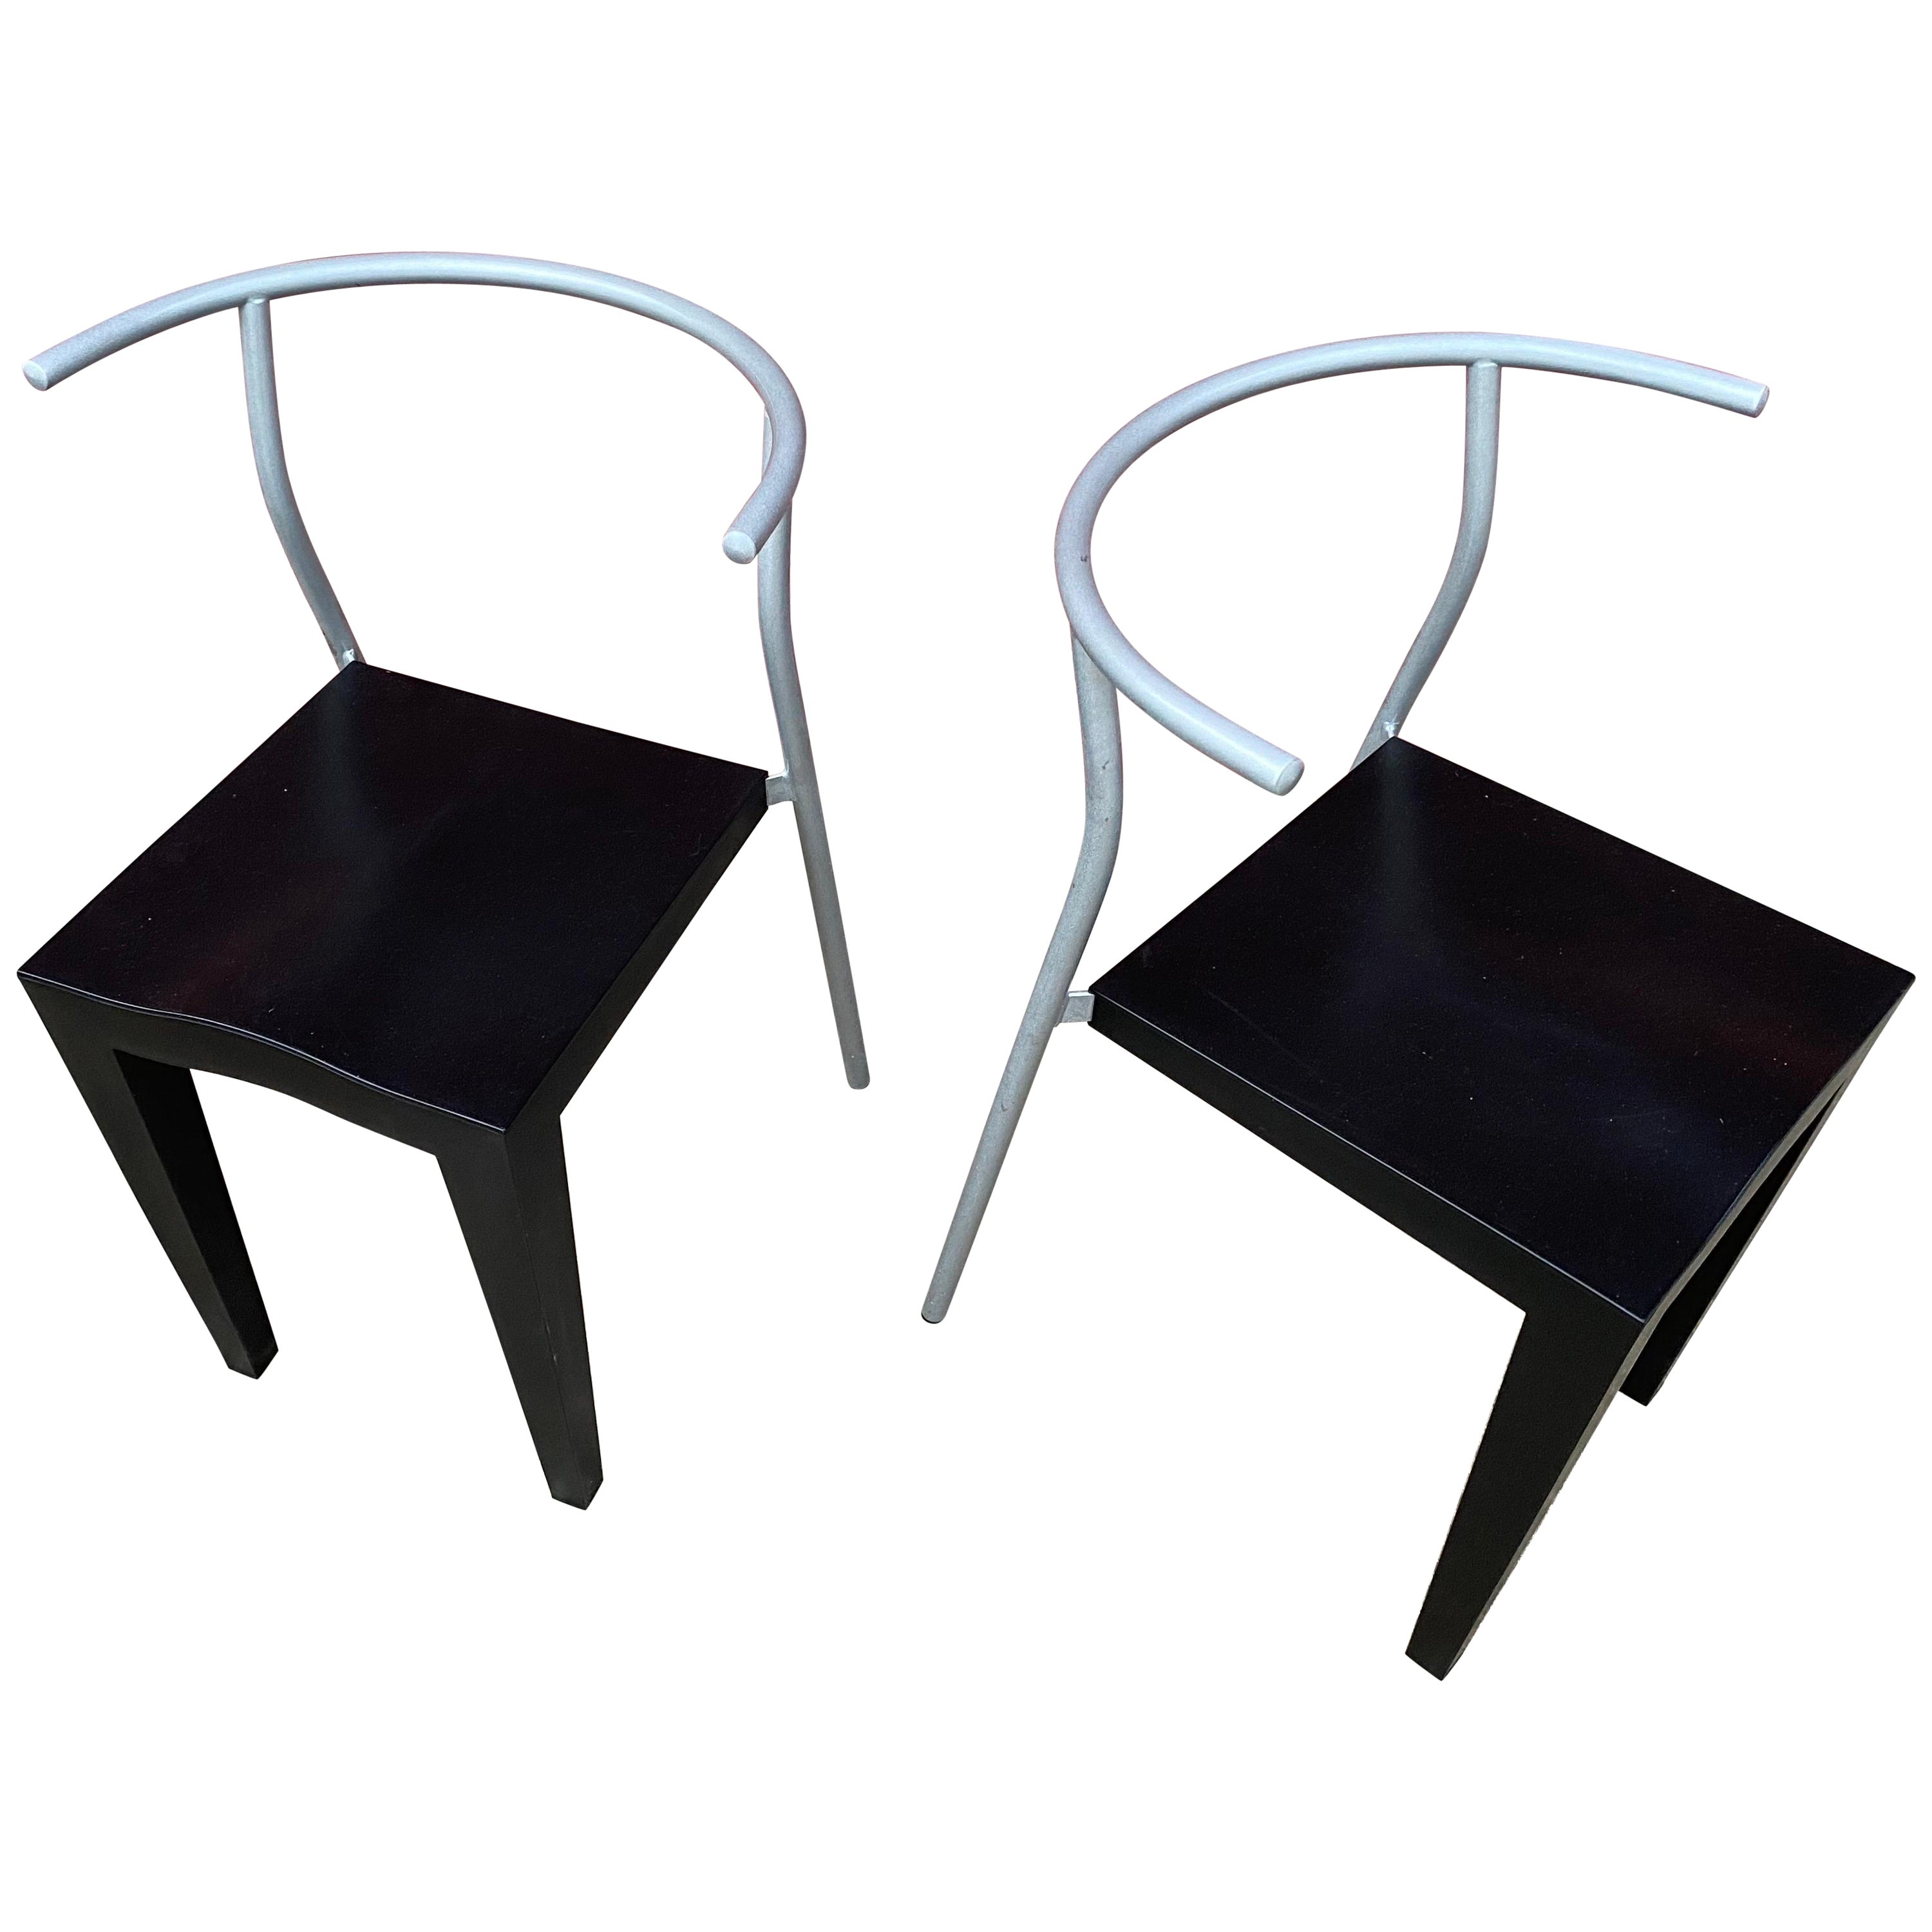 Dr. Glob Chairs by Philippe Starck